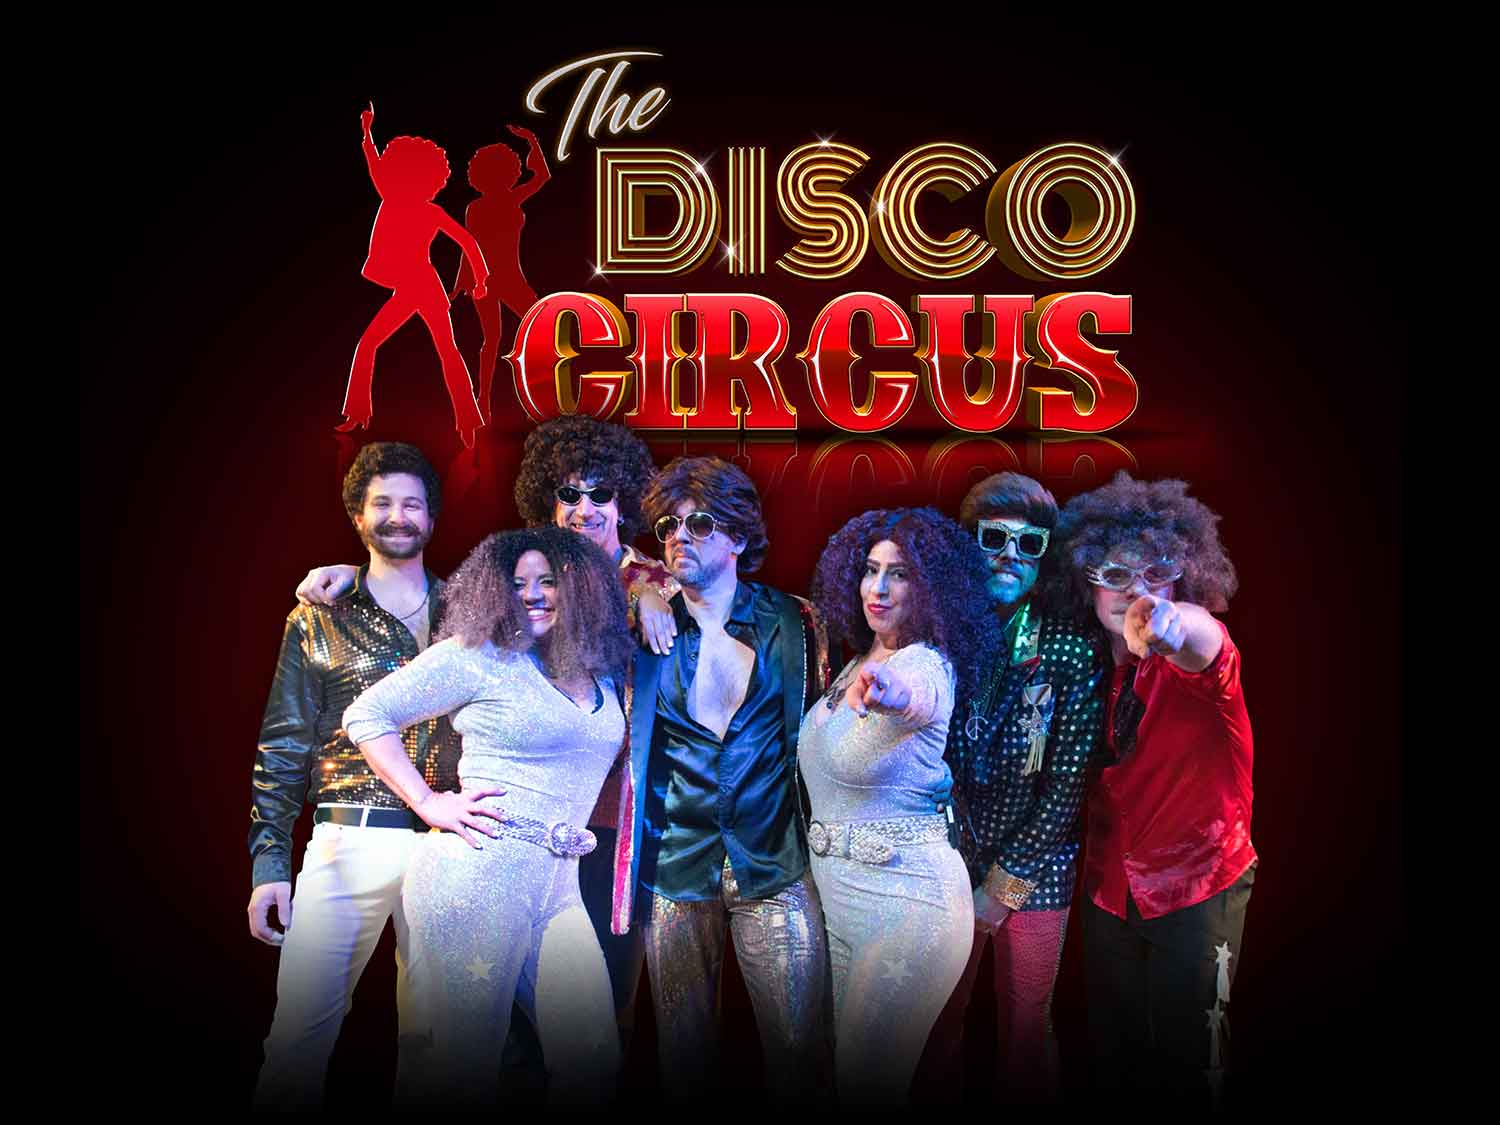 The members of The Disco Circus posing with the logo above them.